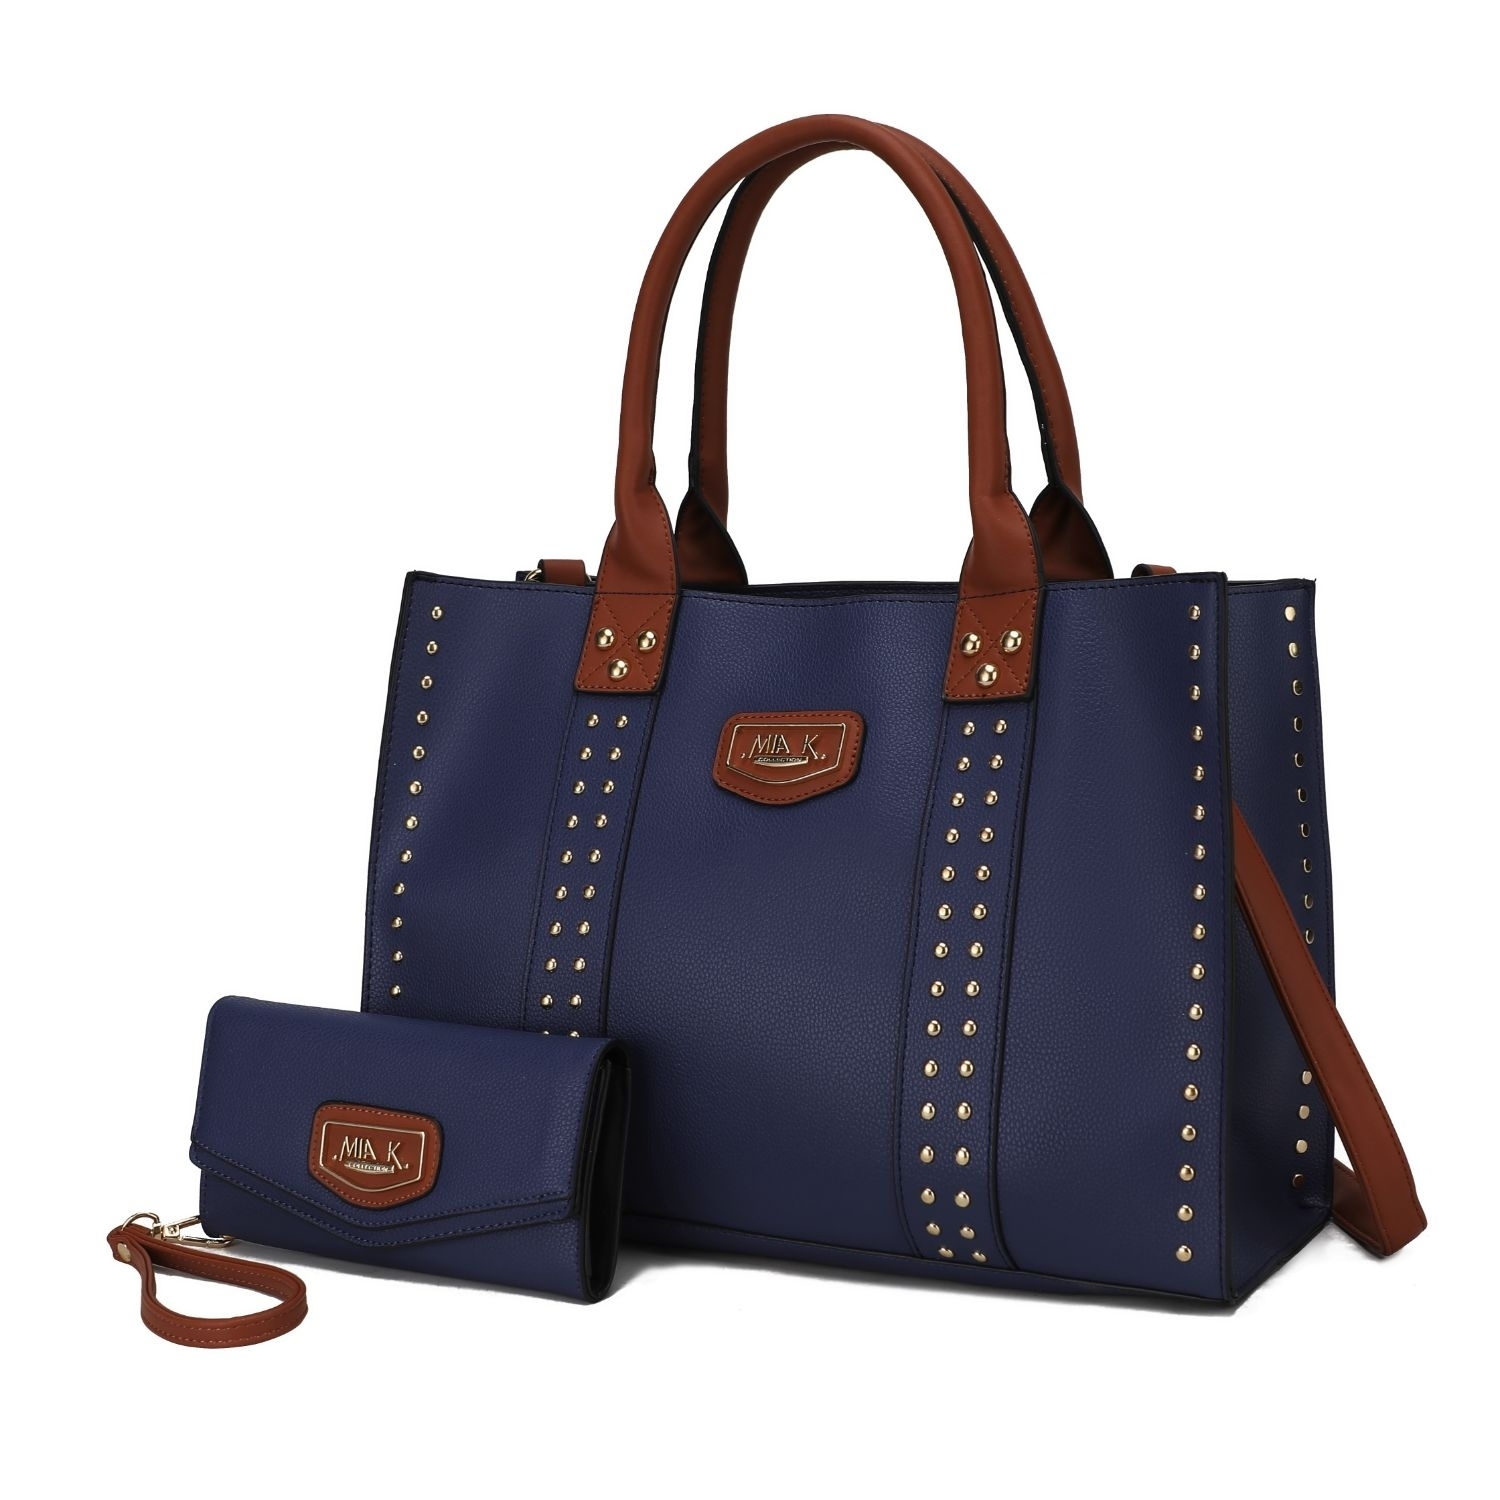 MKF Collection Davina Vegan Leather Women's Tote Bag By Mia K With Wallet -2 Pieces - Navy